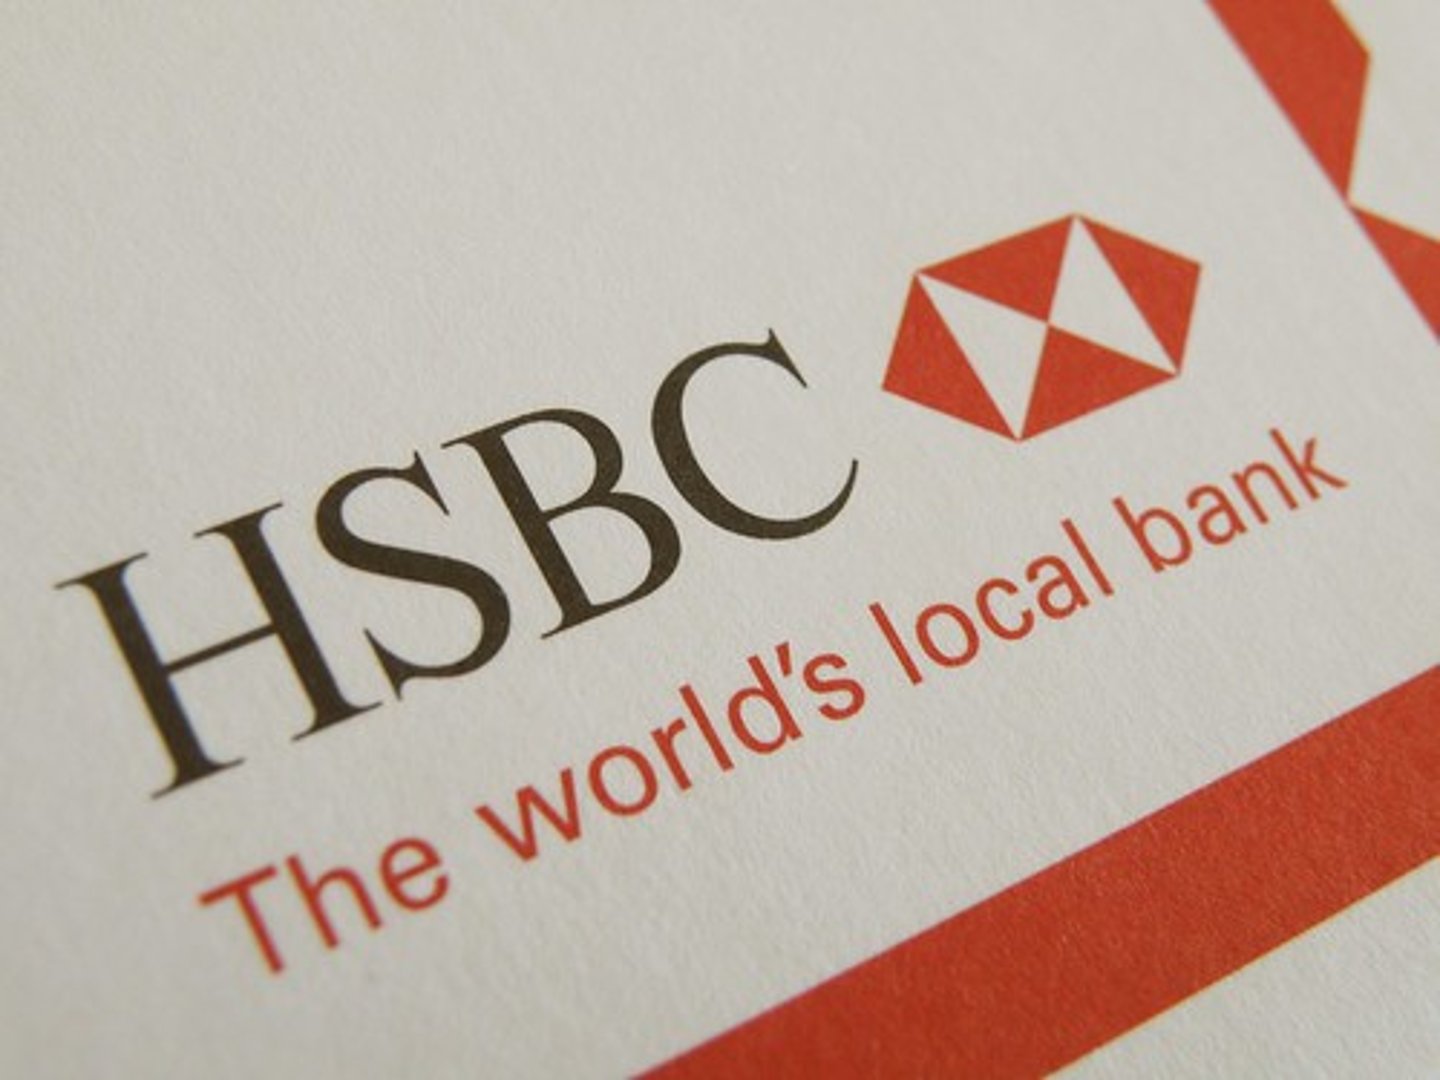 <p>HSBC was established in 1865 to finance trade between Europe and Asia. Initially founded in the British colony of Hong Kong it benefited from the opening of China to trade, including the opium trade.</p>